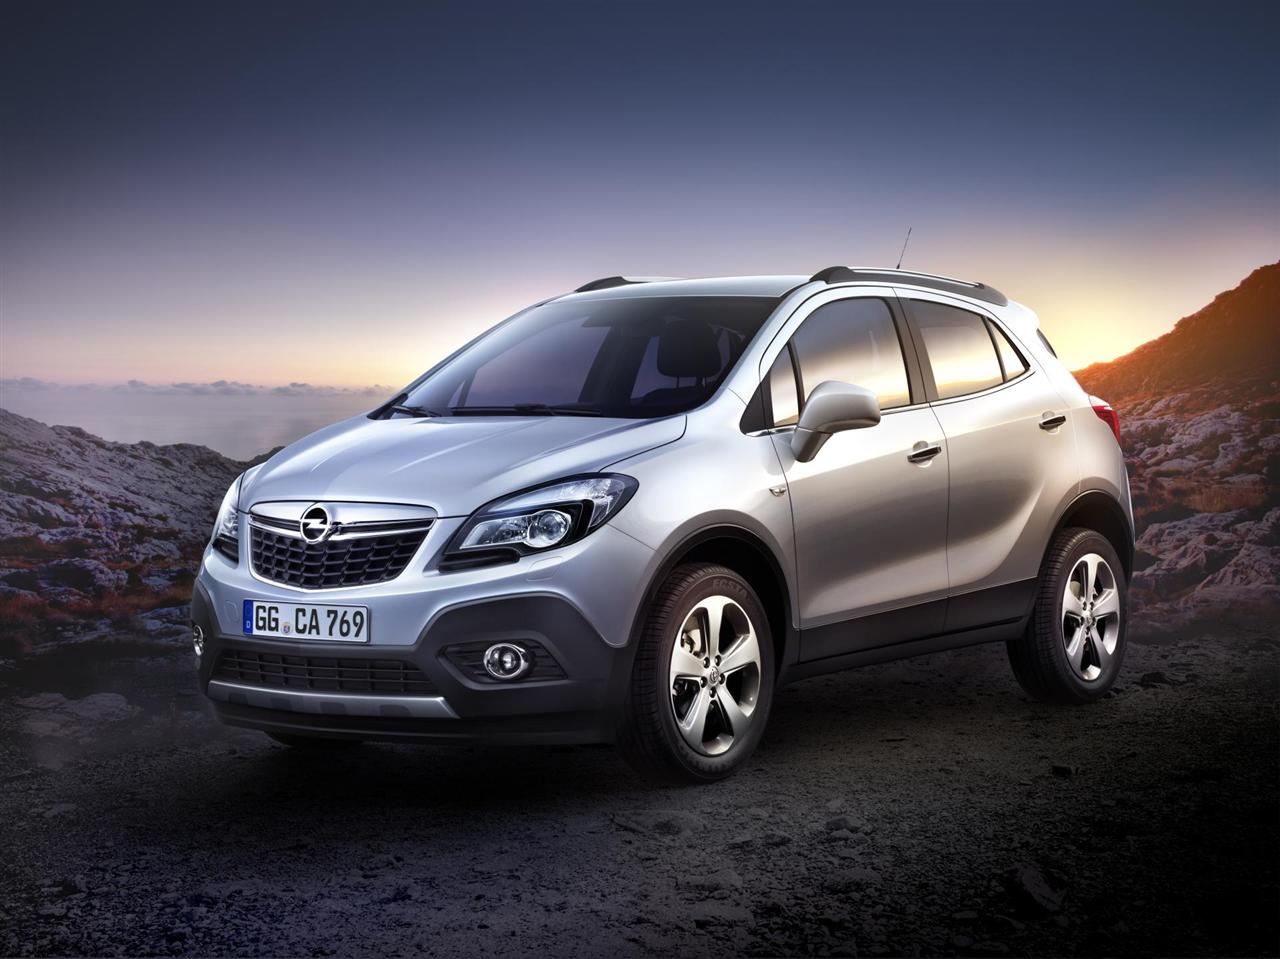 Extra Efficient Engines: New Opel Mokka Combines Fun and Modernity, Opel